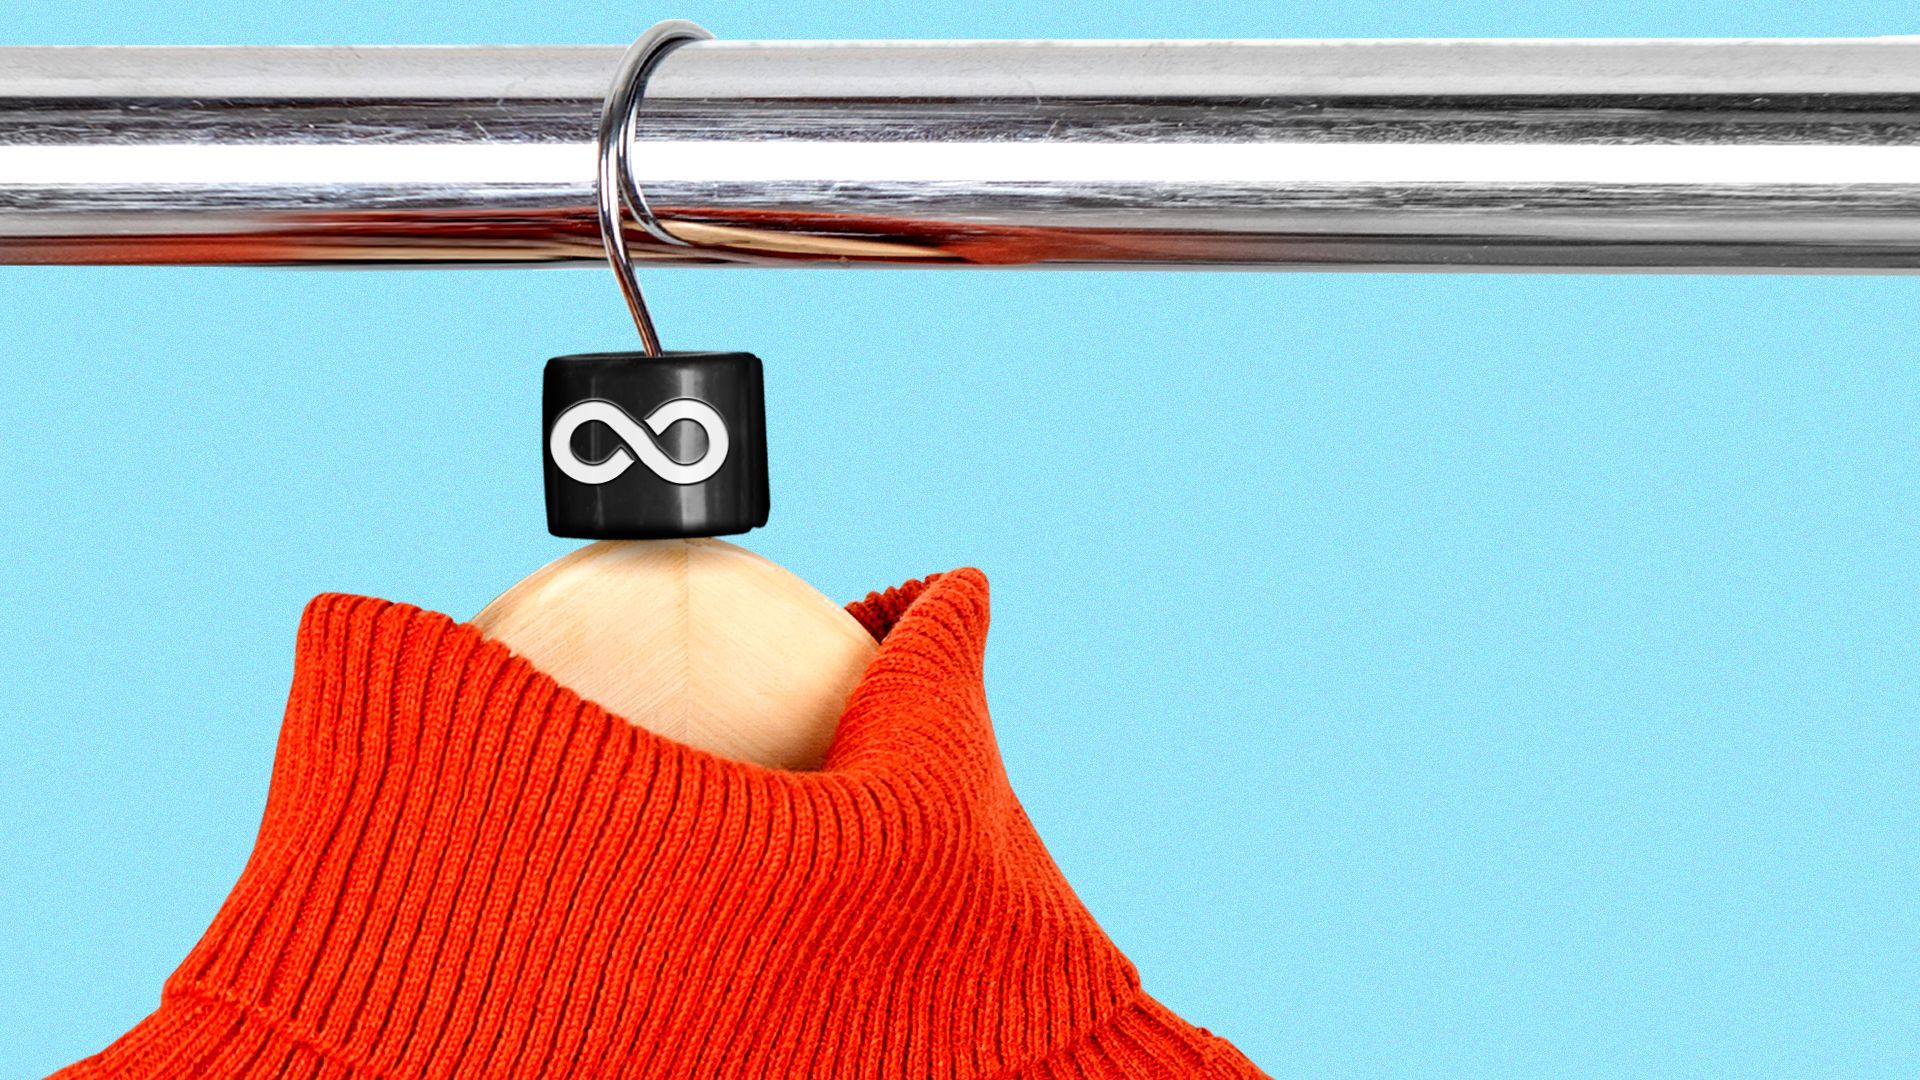 Illustration of a clothing hanger size tag with an infinity symbol in place of a size number